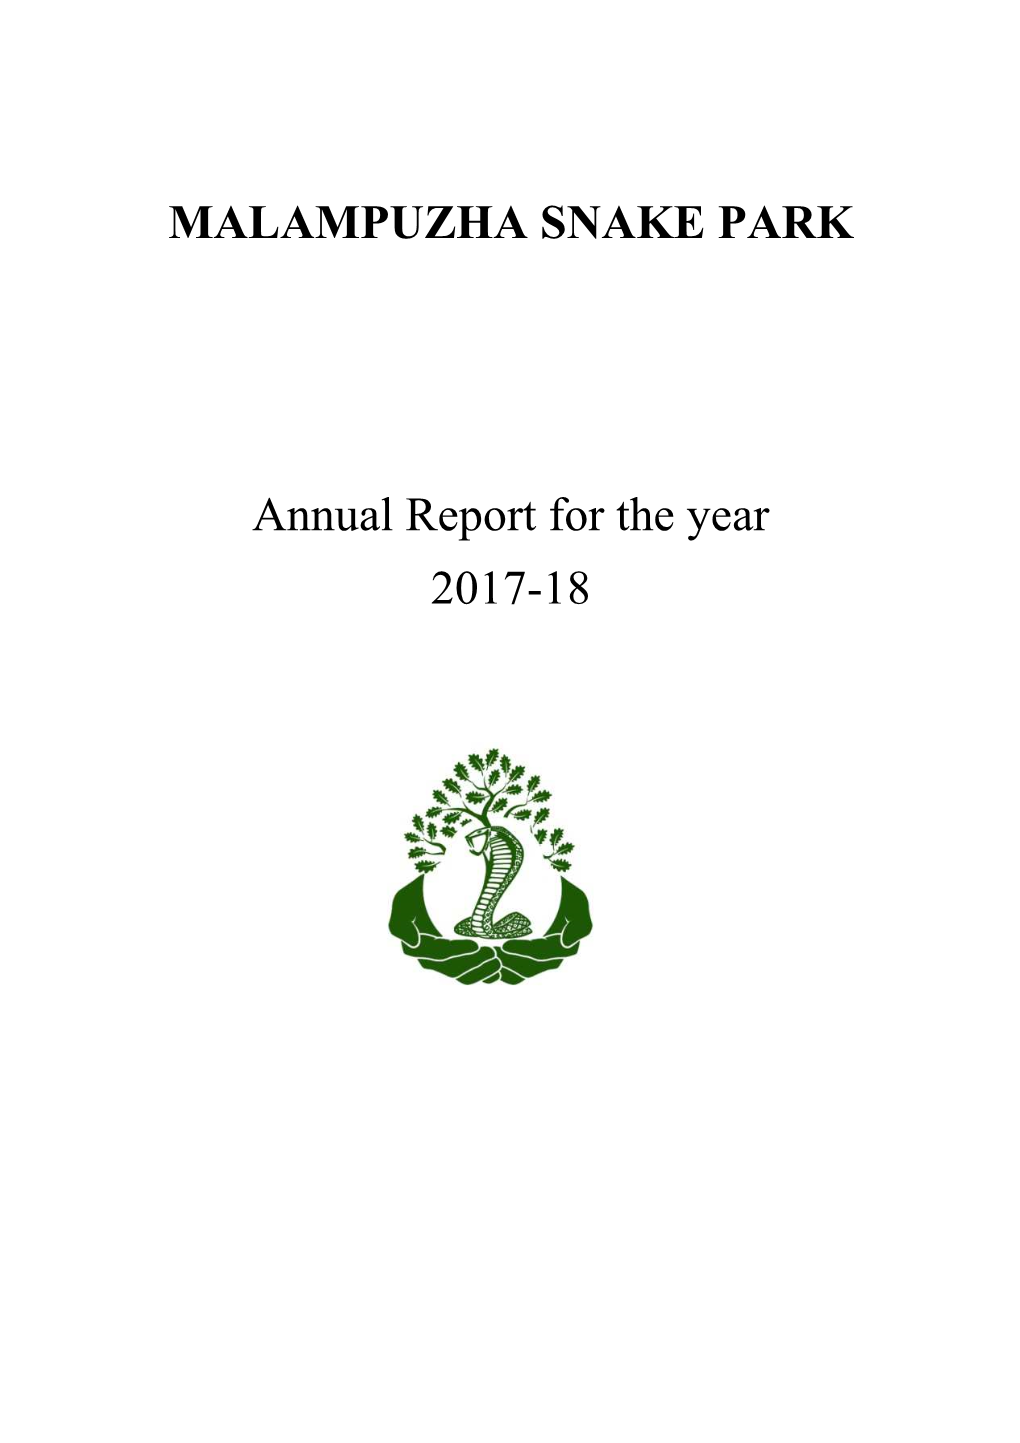 MALAMPUZHA SNAKE PARK Annual Report for the Year 2017-18